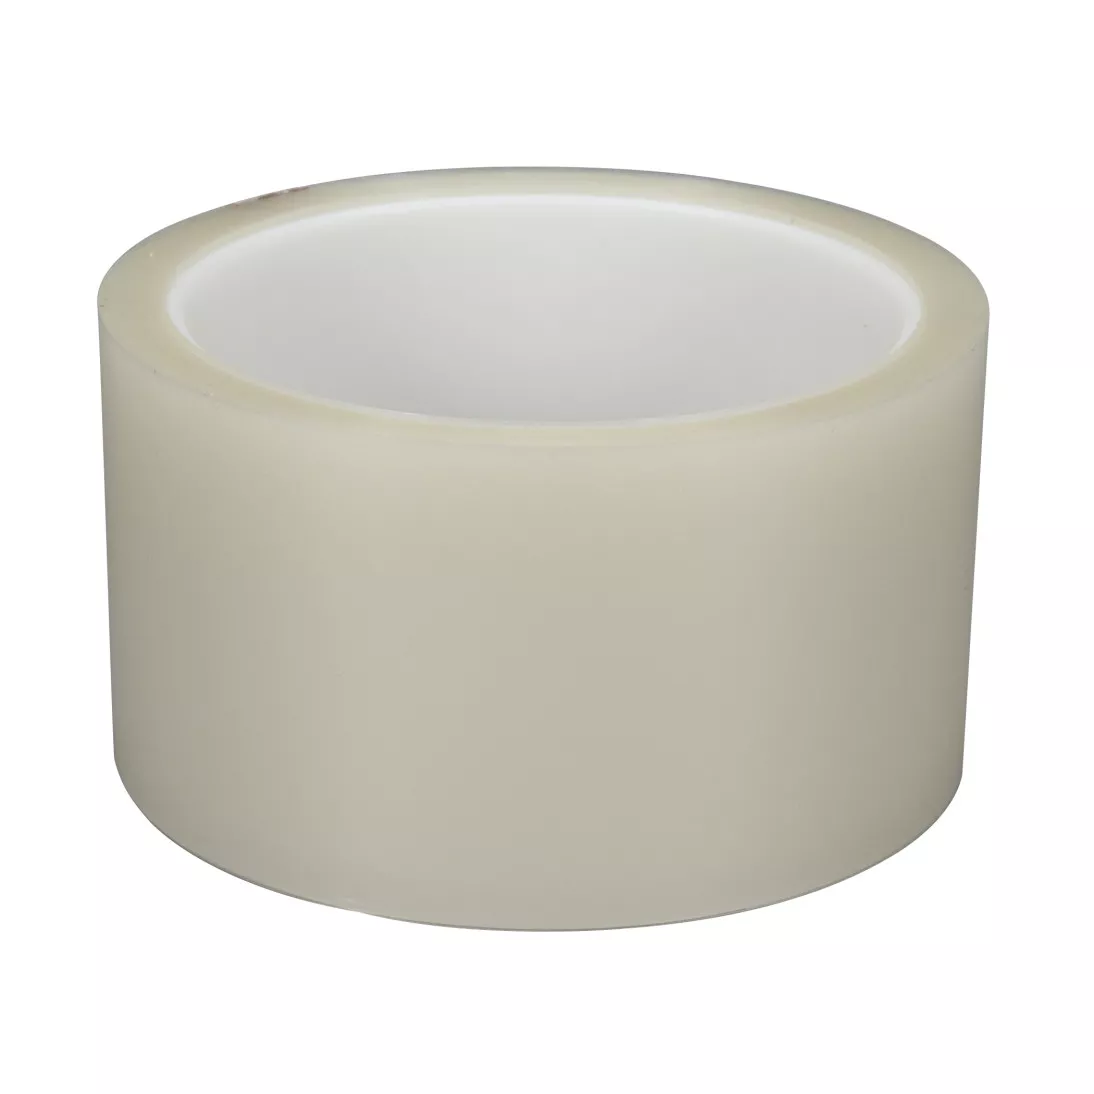 3M™ Polyester Film Tape 853, Transparent, 48 in x 72 yd, 2.2 mil, 1 roll per case